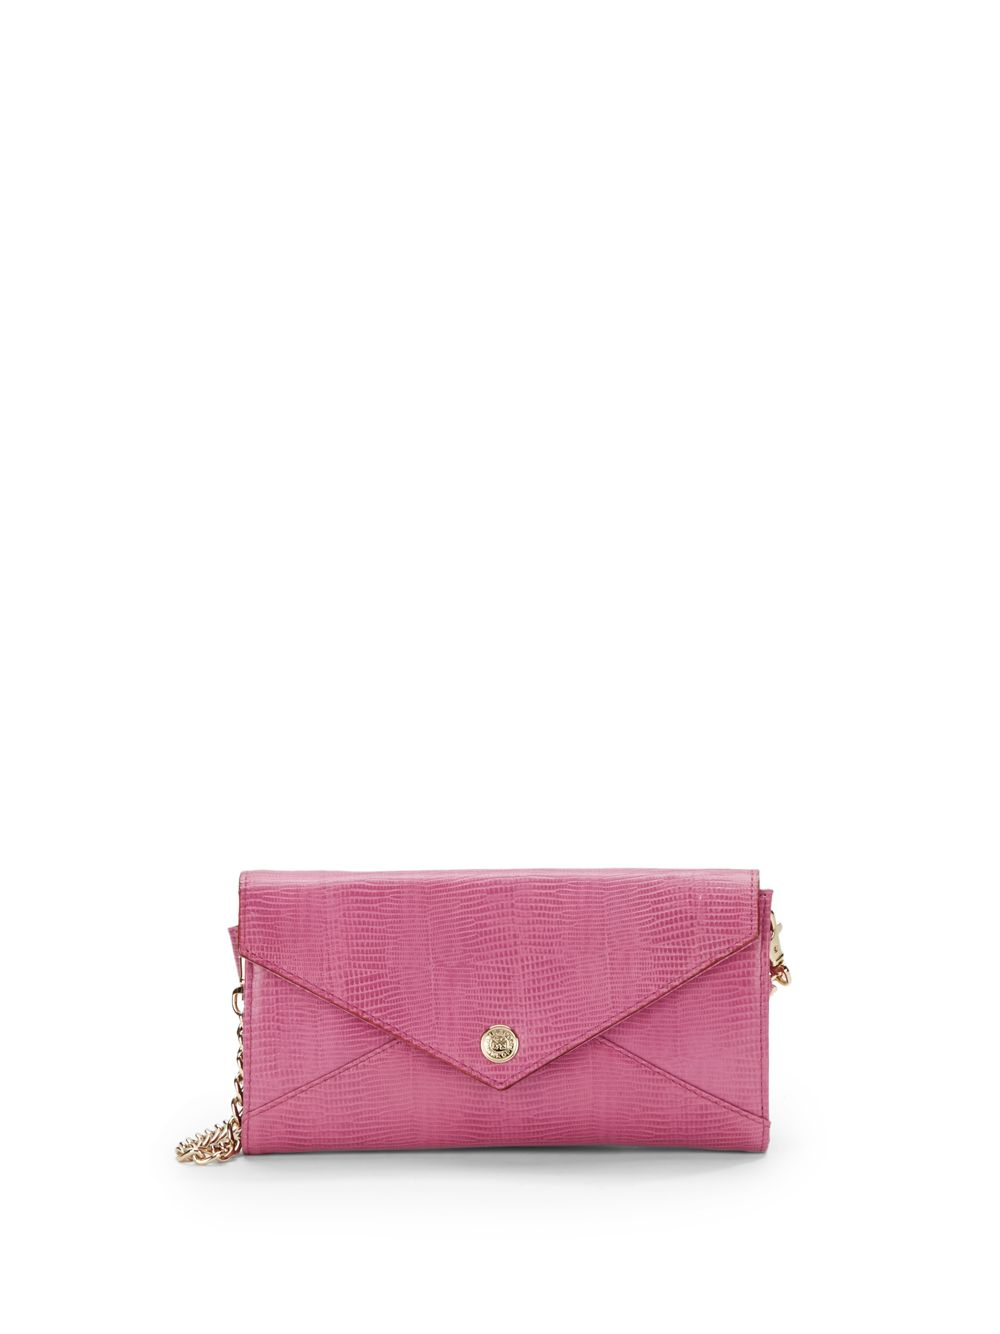 Rebecca Minkoff Lizardembossed Leather Envelope Convertible Clutch in ...